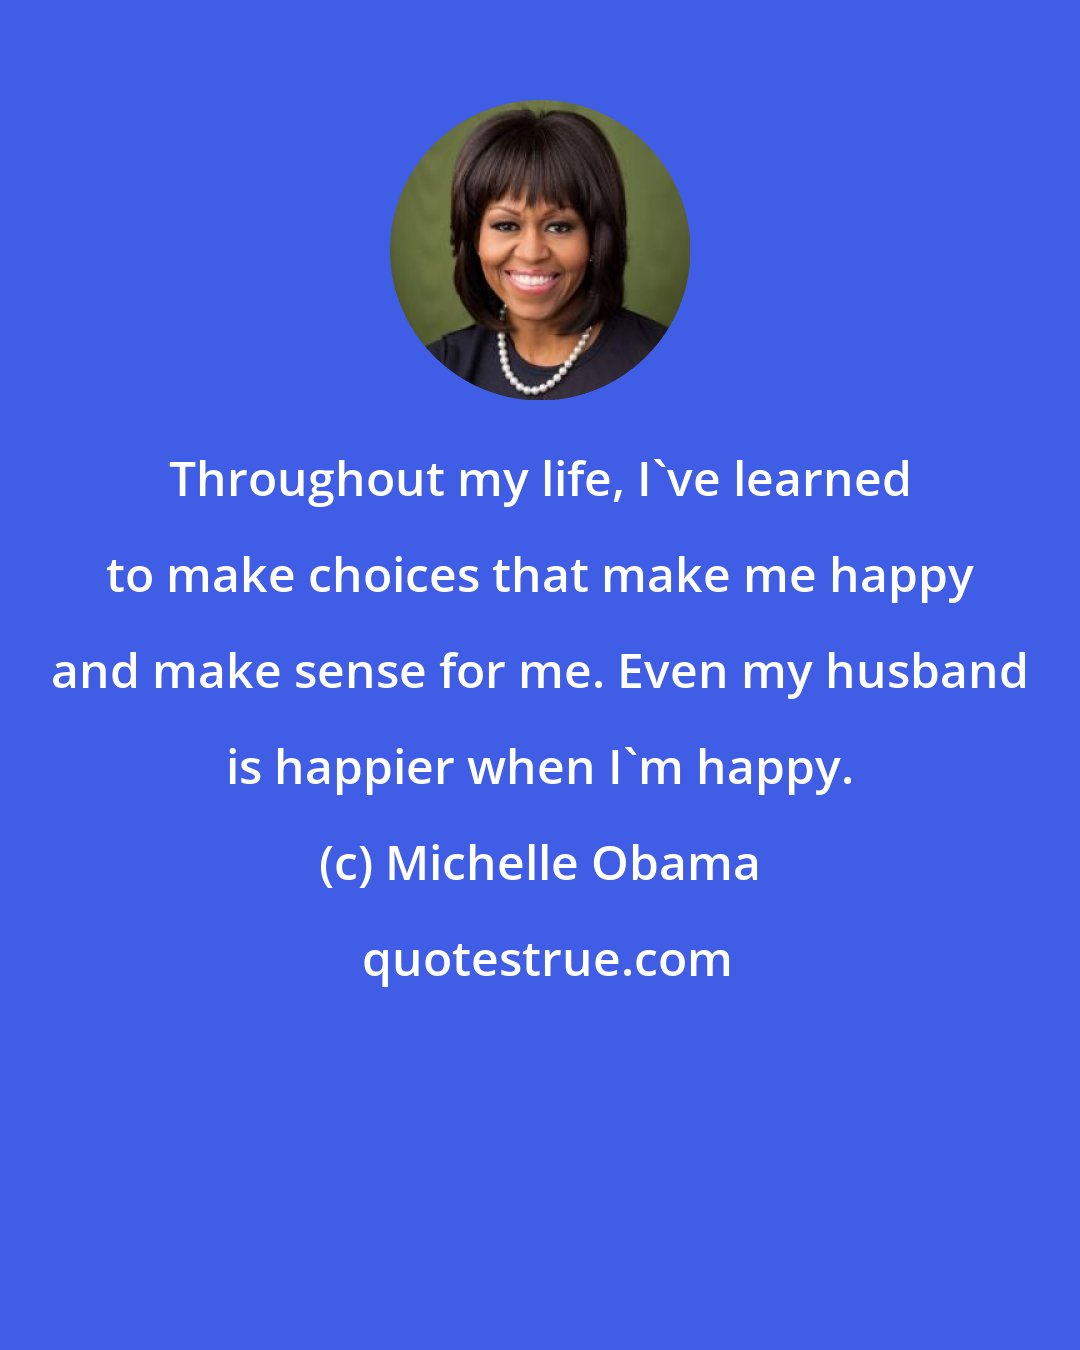 Michelle Obama: Throughout my life, I've learned to make choices that make me happy and make sense for me. Even my husband is happier when I'm happy.